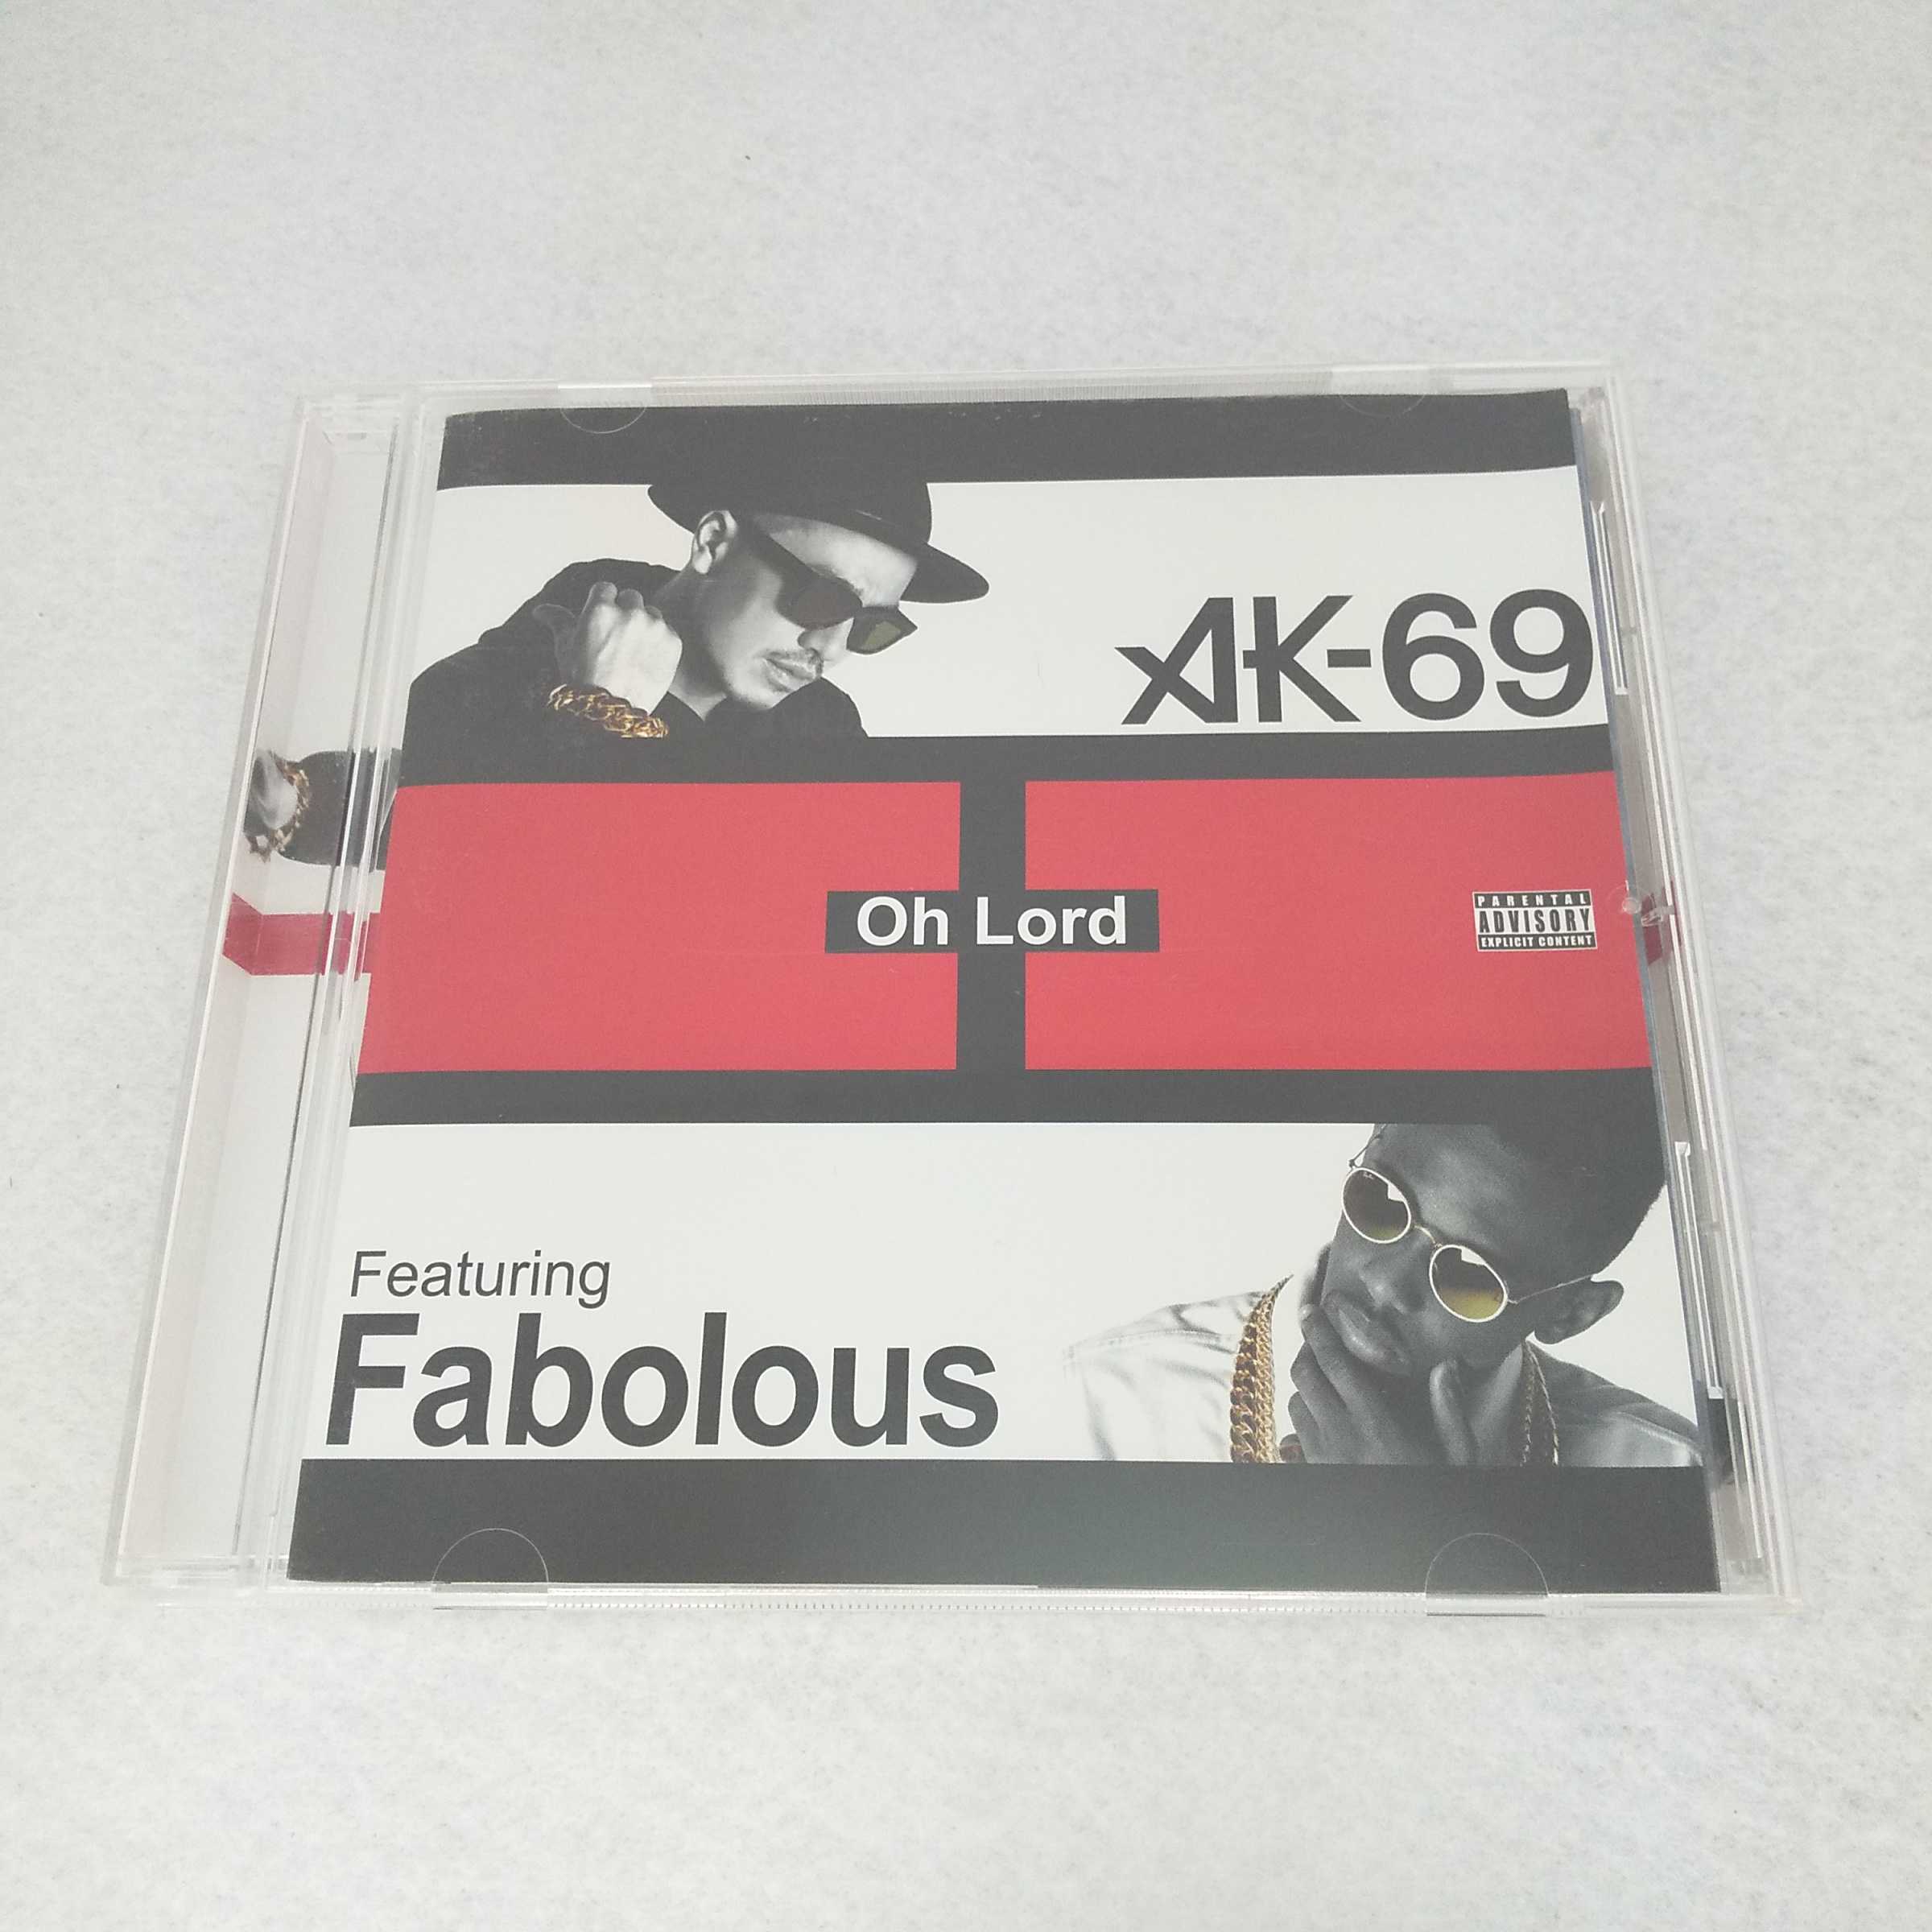 AC08190 【中古】 【CD】 Oh Lord/AK-69 featuring Fabolous